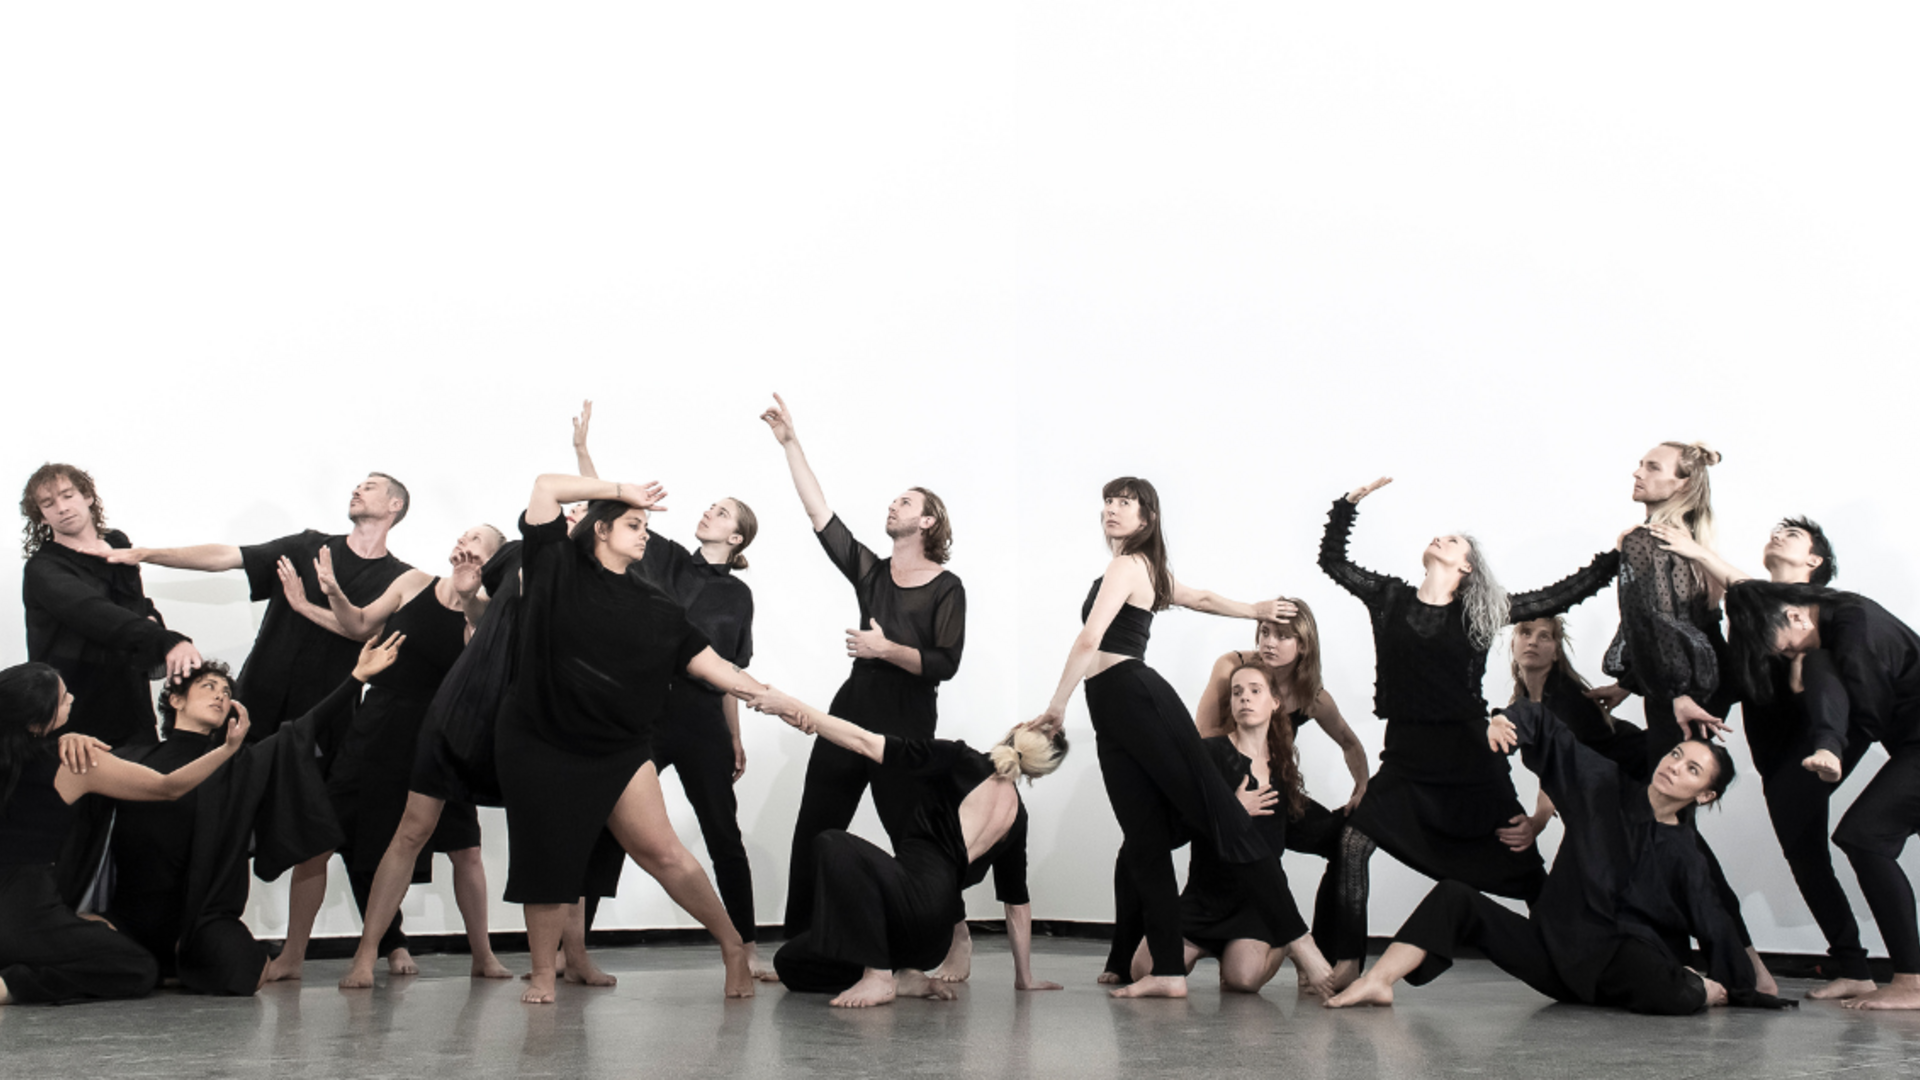 19 dancers dressed in black pose in a tableau, in a white studio with a polished concrete floor.